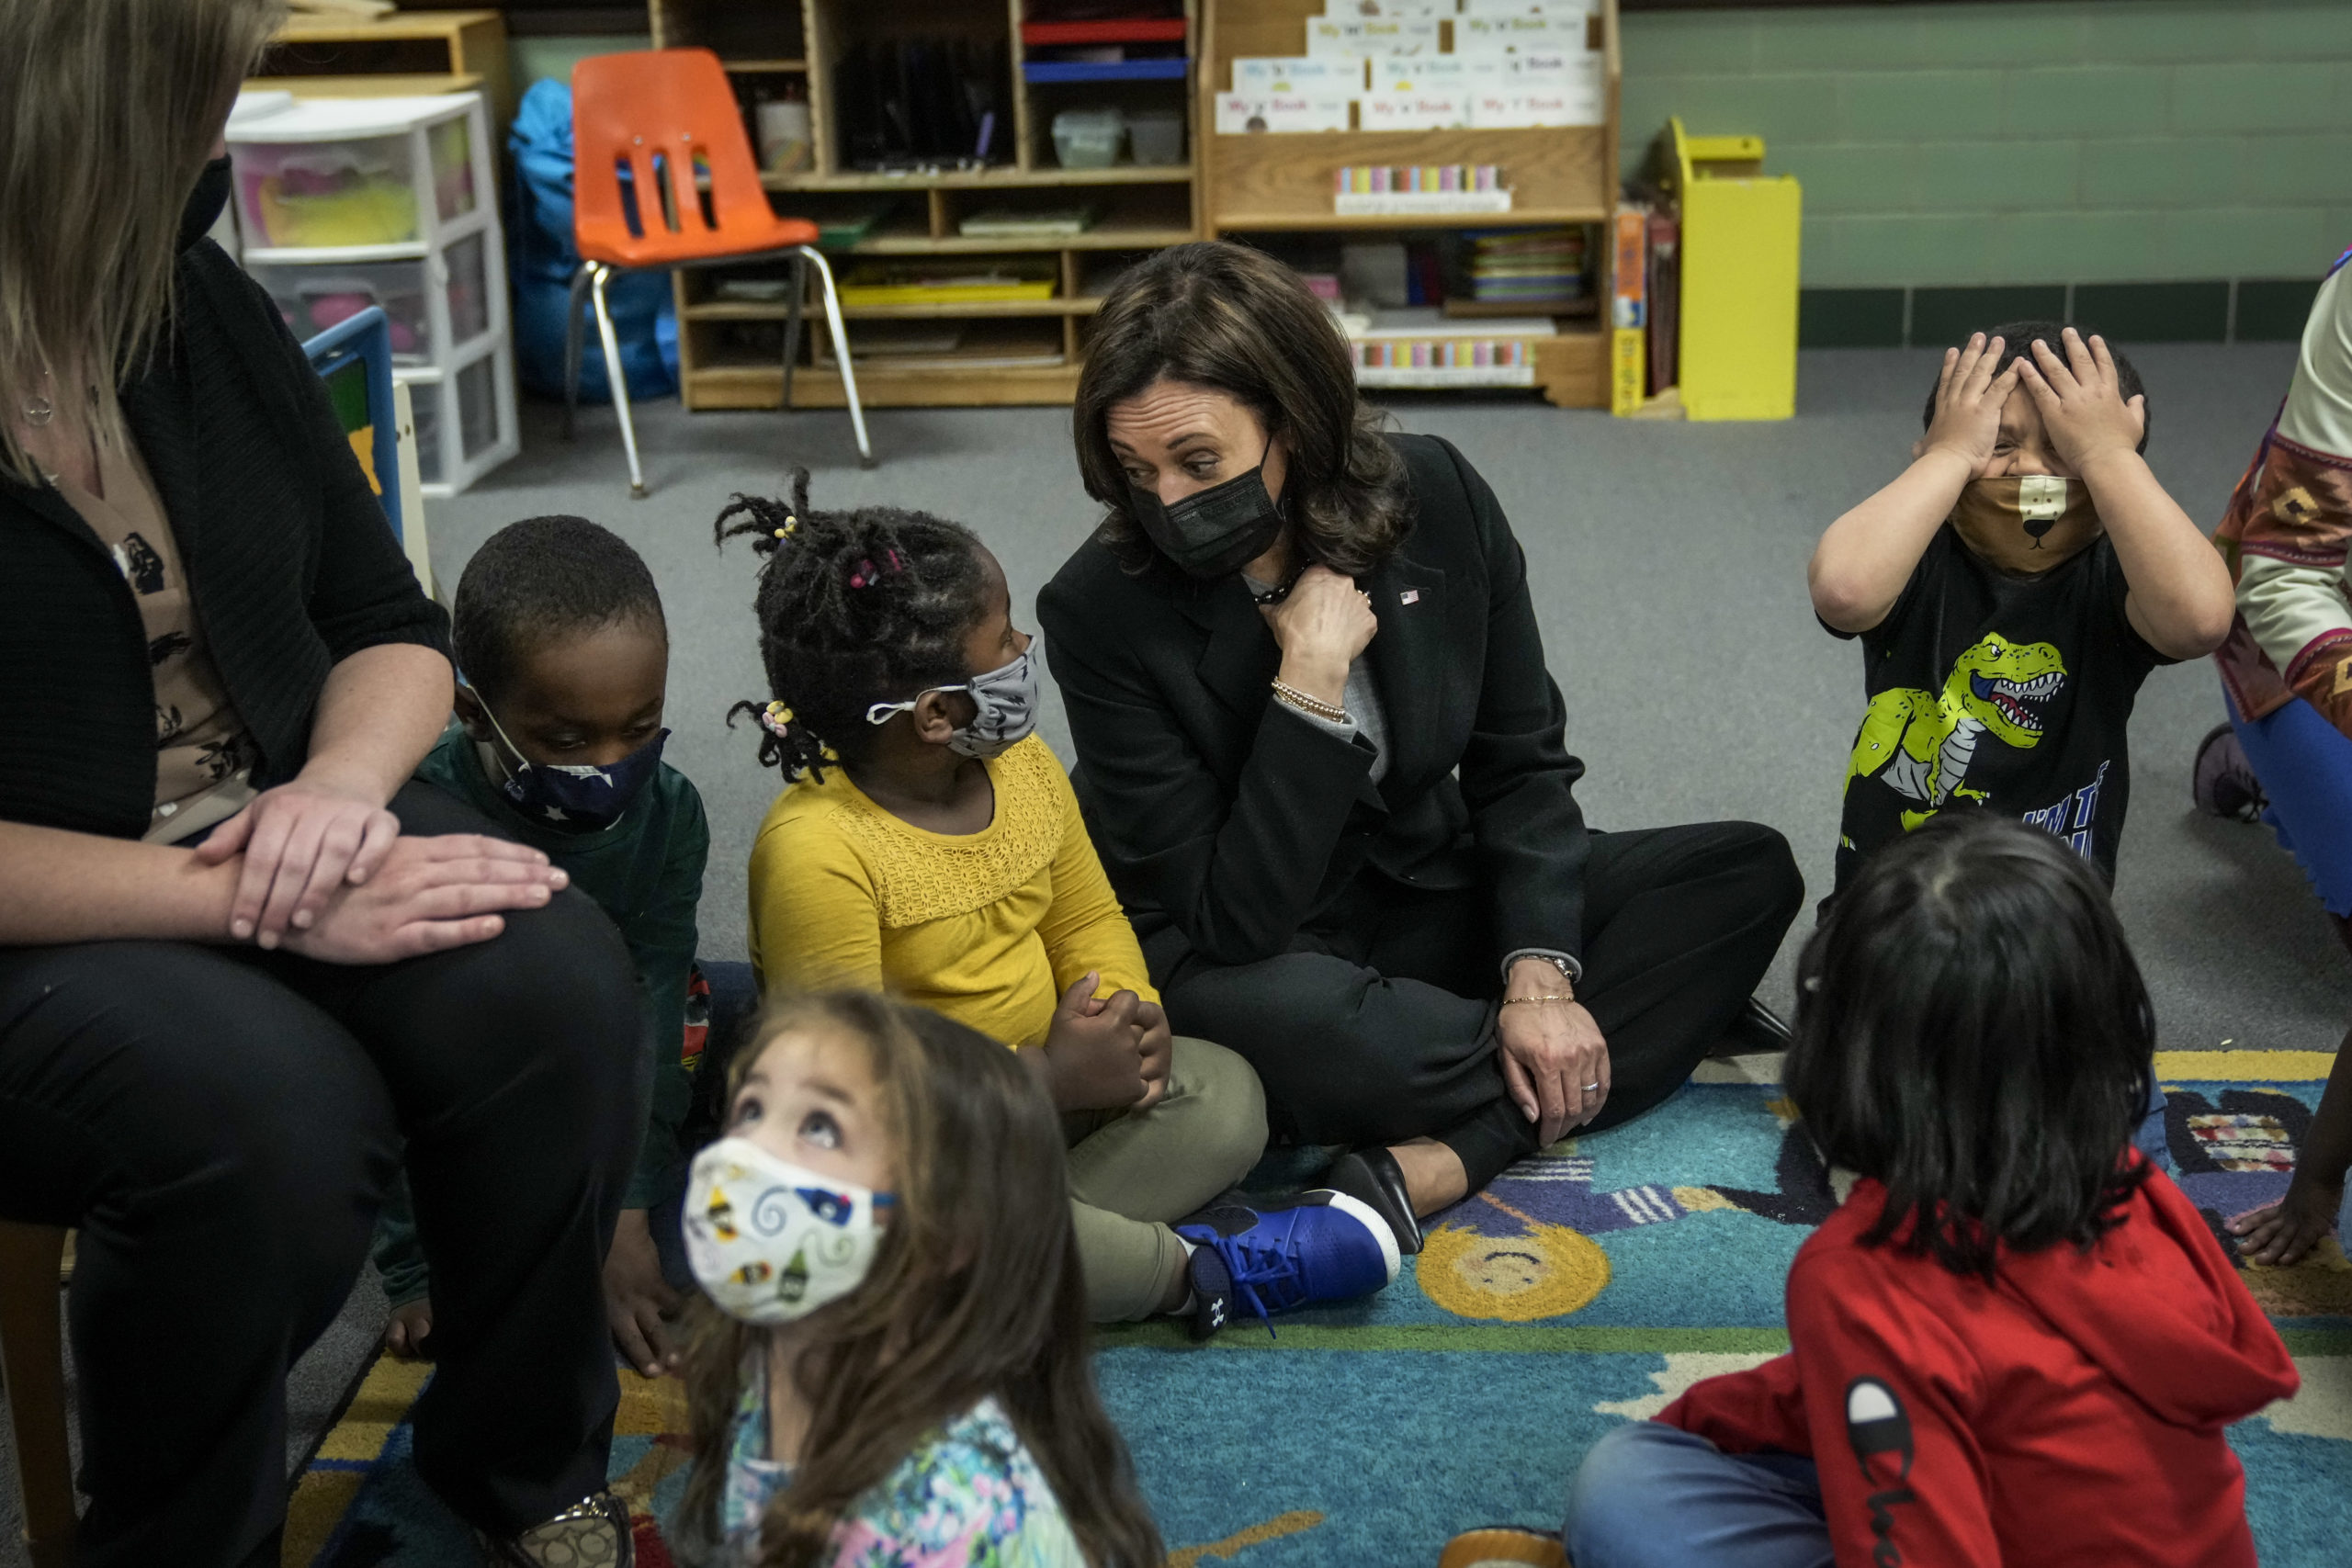 U.S. Vice President Kamala Harris visits with students in a pre-school classroom at West Haven Child Development Center on March 26, 2021 in West Haven, Connecticut. Harris is traveling to New Haven, Connecticut to promote the Biden administration's recently passed $1.9 billion federal stimulus package. (Photo by Drew Angerer/Getty Images)